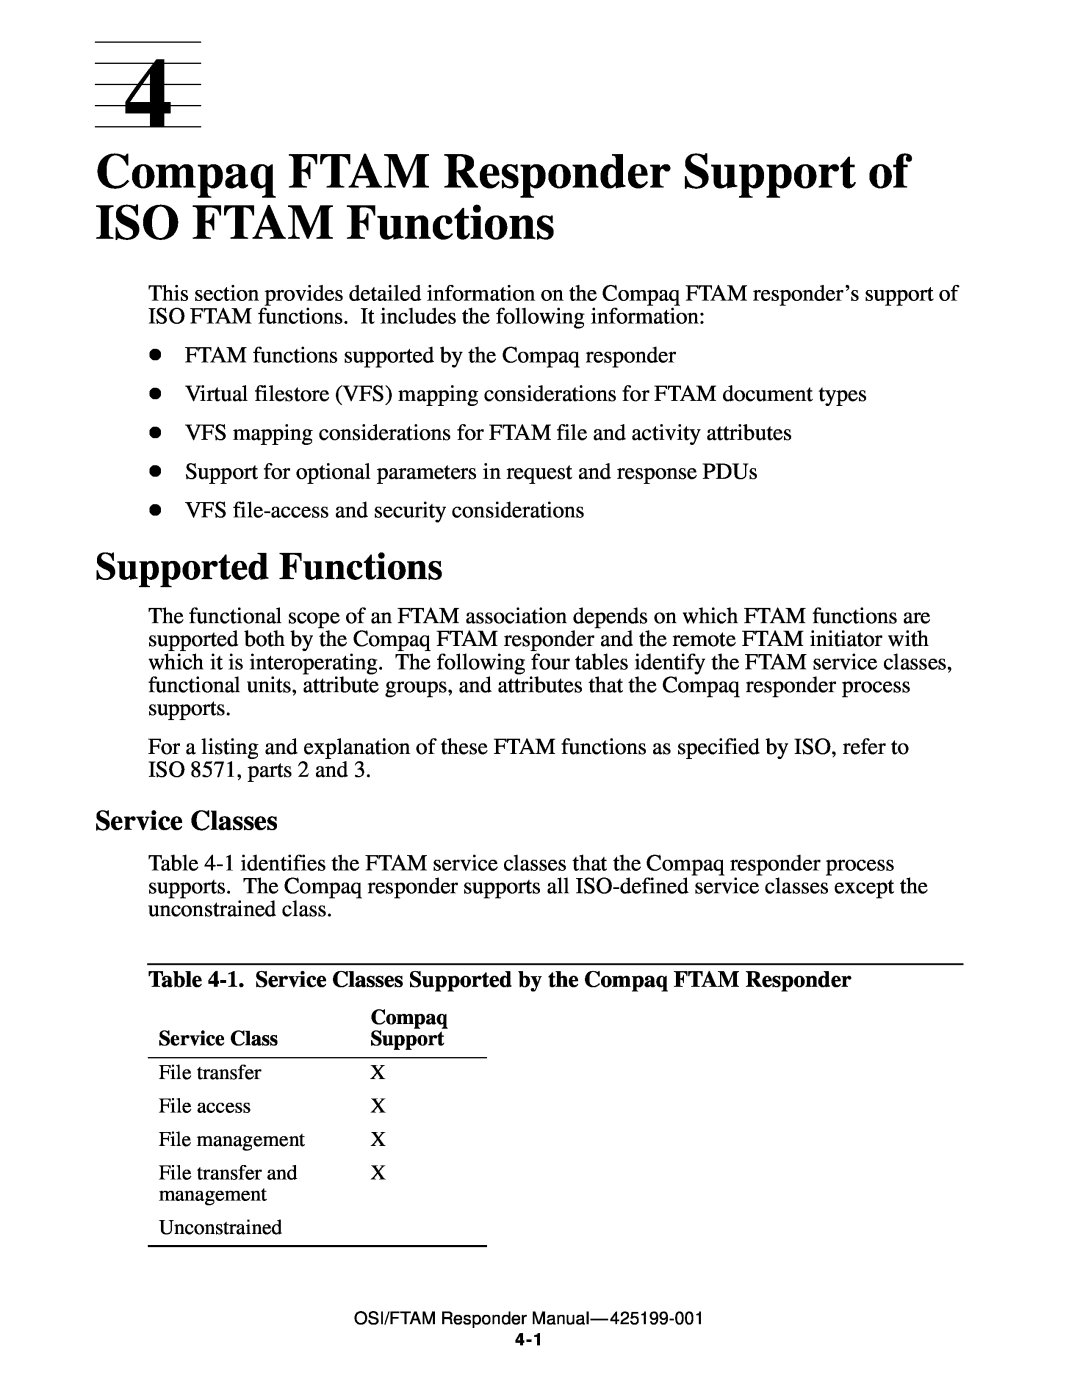 Compaq OSI/FTAM D43 manual Compaq FTAM Responder Support of ISO FTAM Functions, Supported Functions, Service Classes 